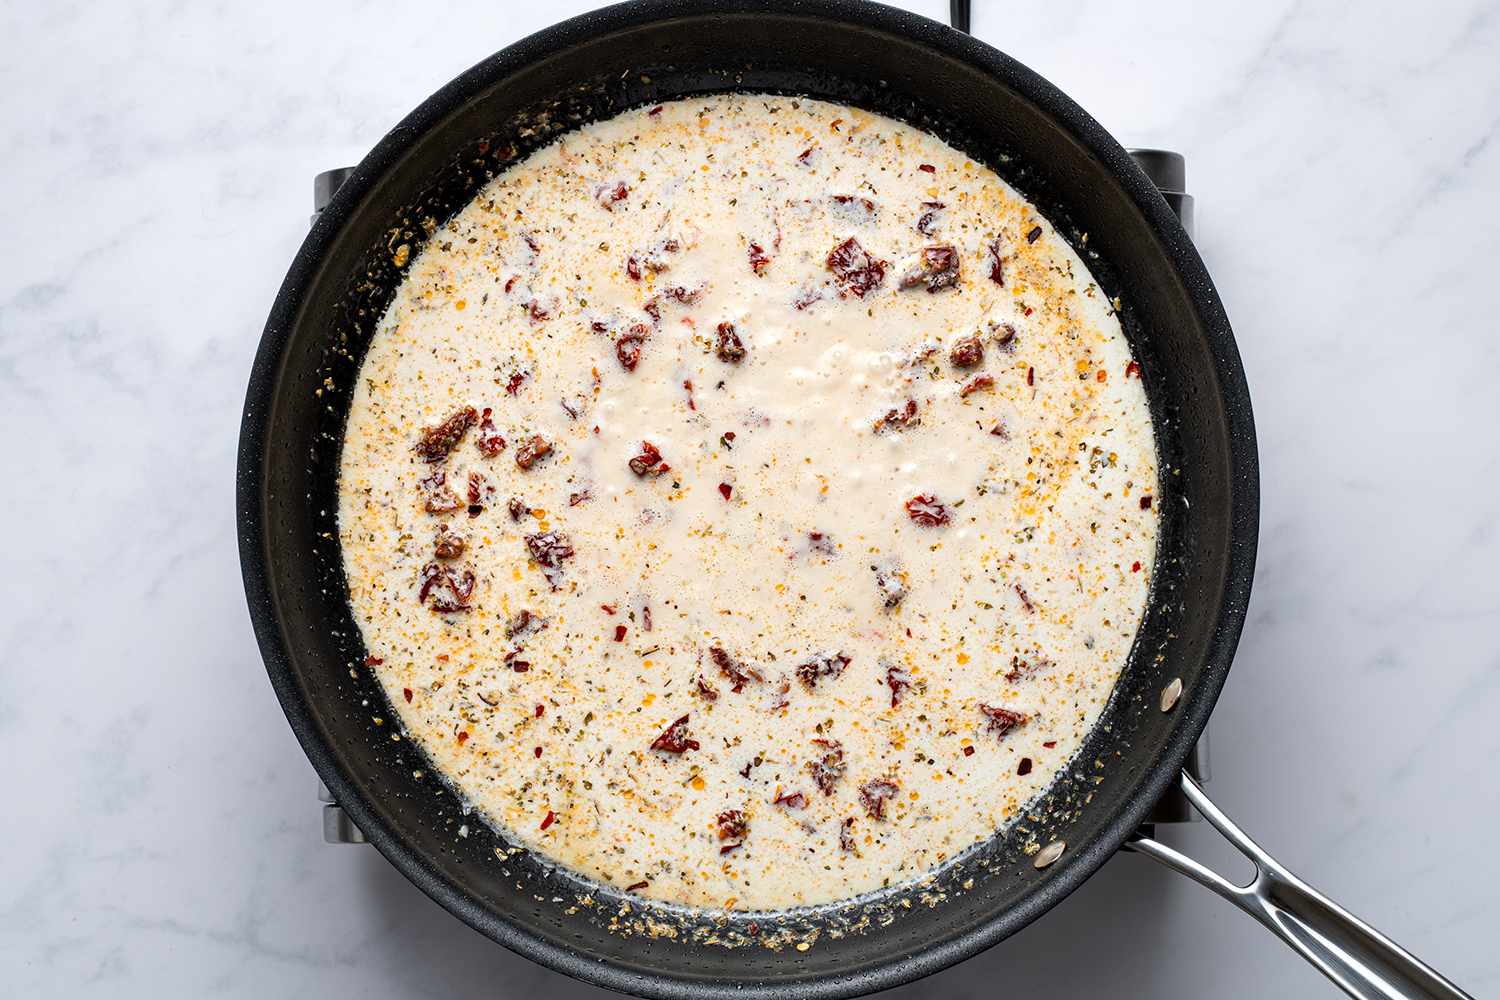 Creamy sauce with bits of sun-dried tomatoes simmering in a skillet